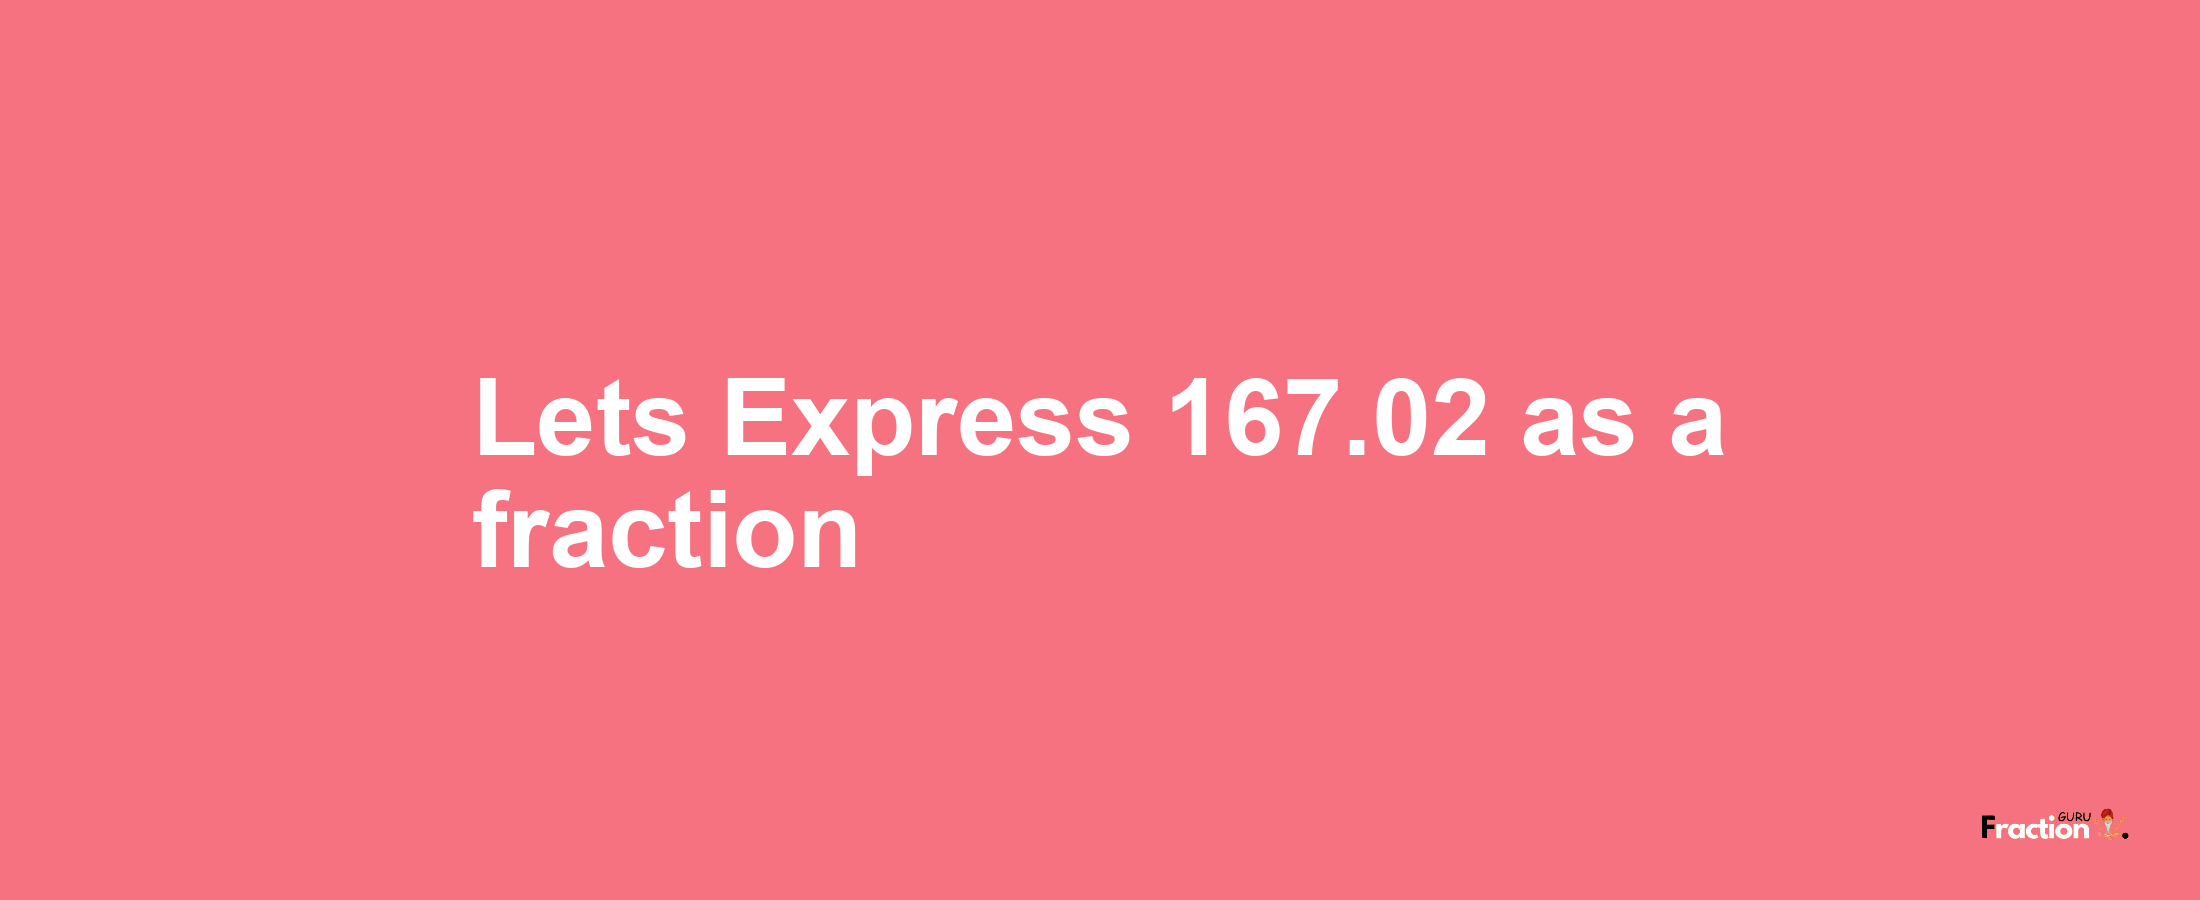 Lets Express 167.02 as afraction